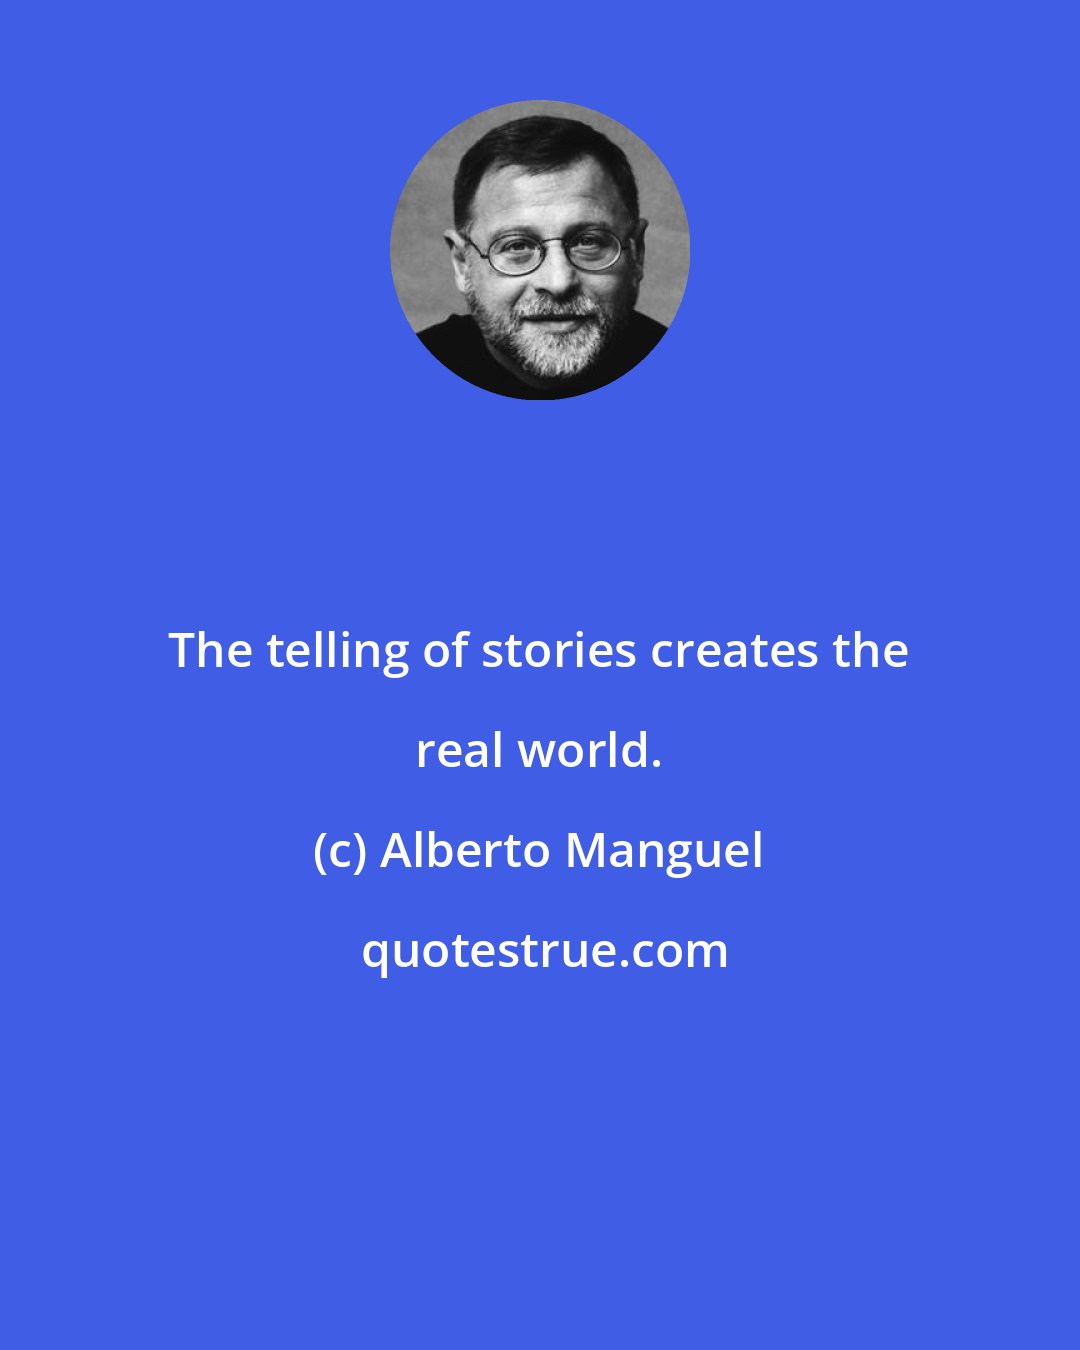 Alberto Manguel: The telling of stories creates the real world.